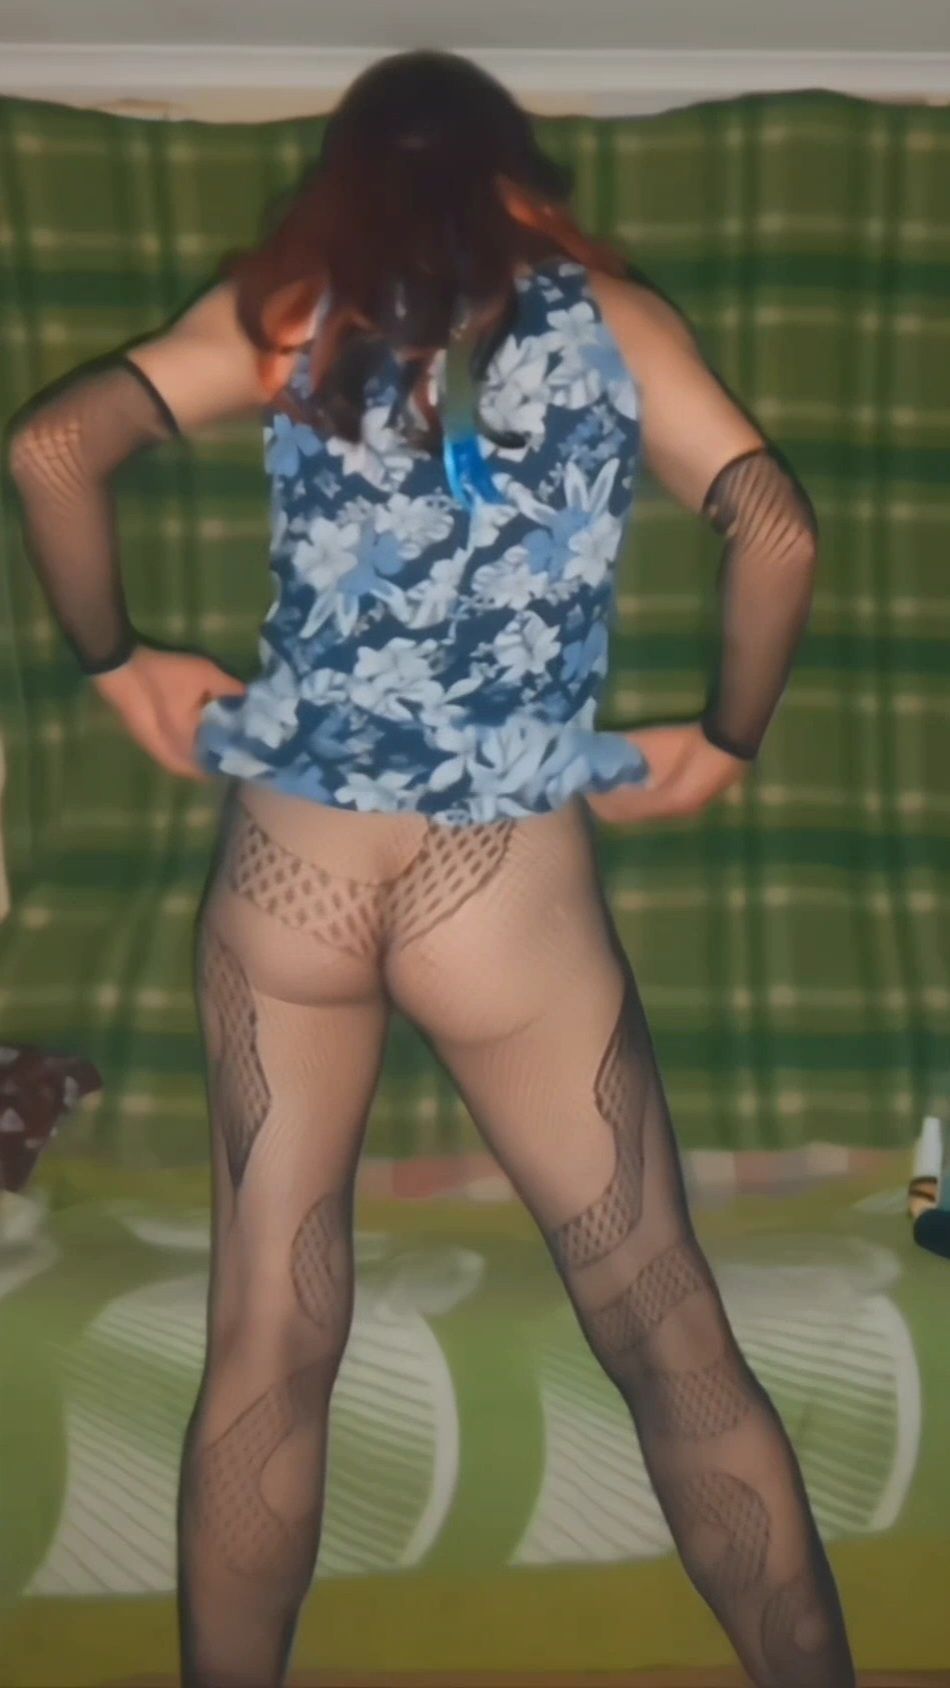 Some shots in my blue dress and snake pattern pantyhose #7